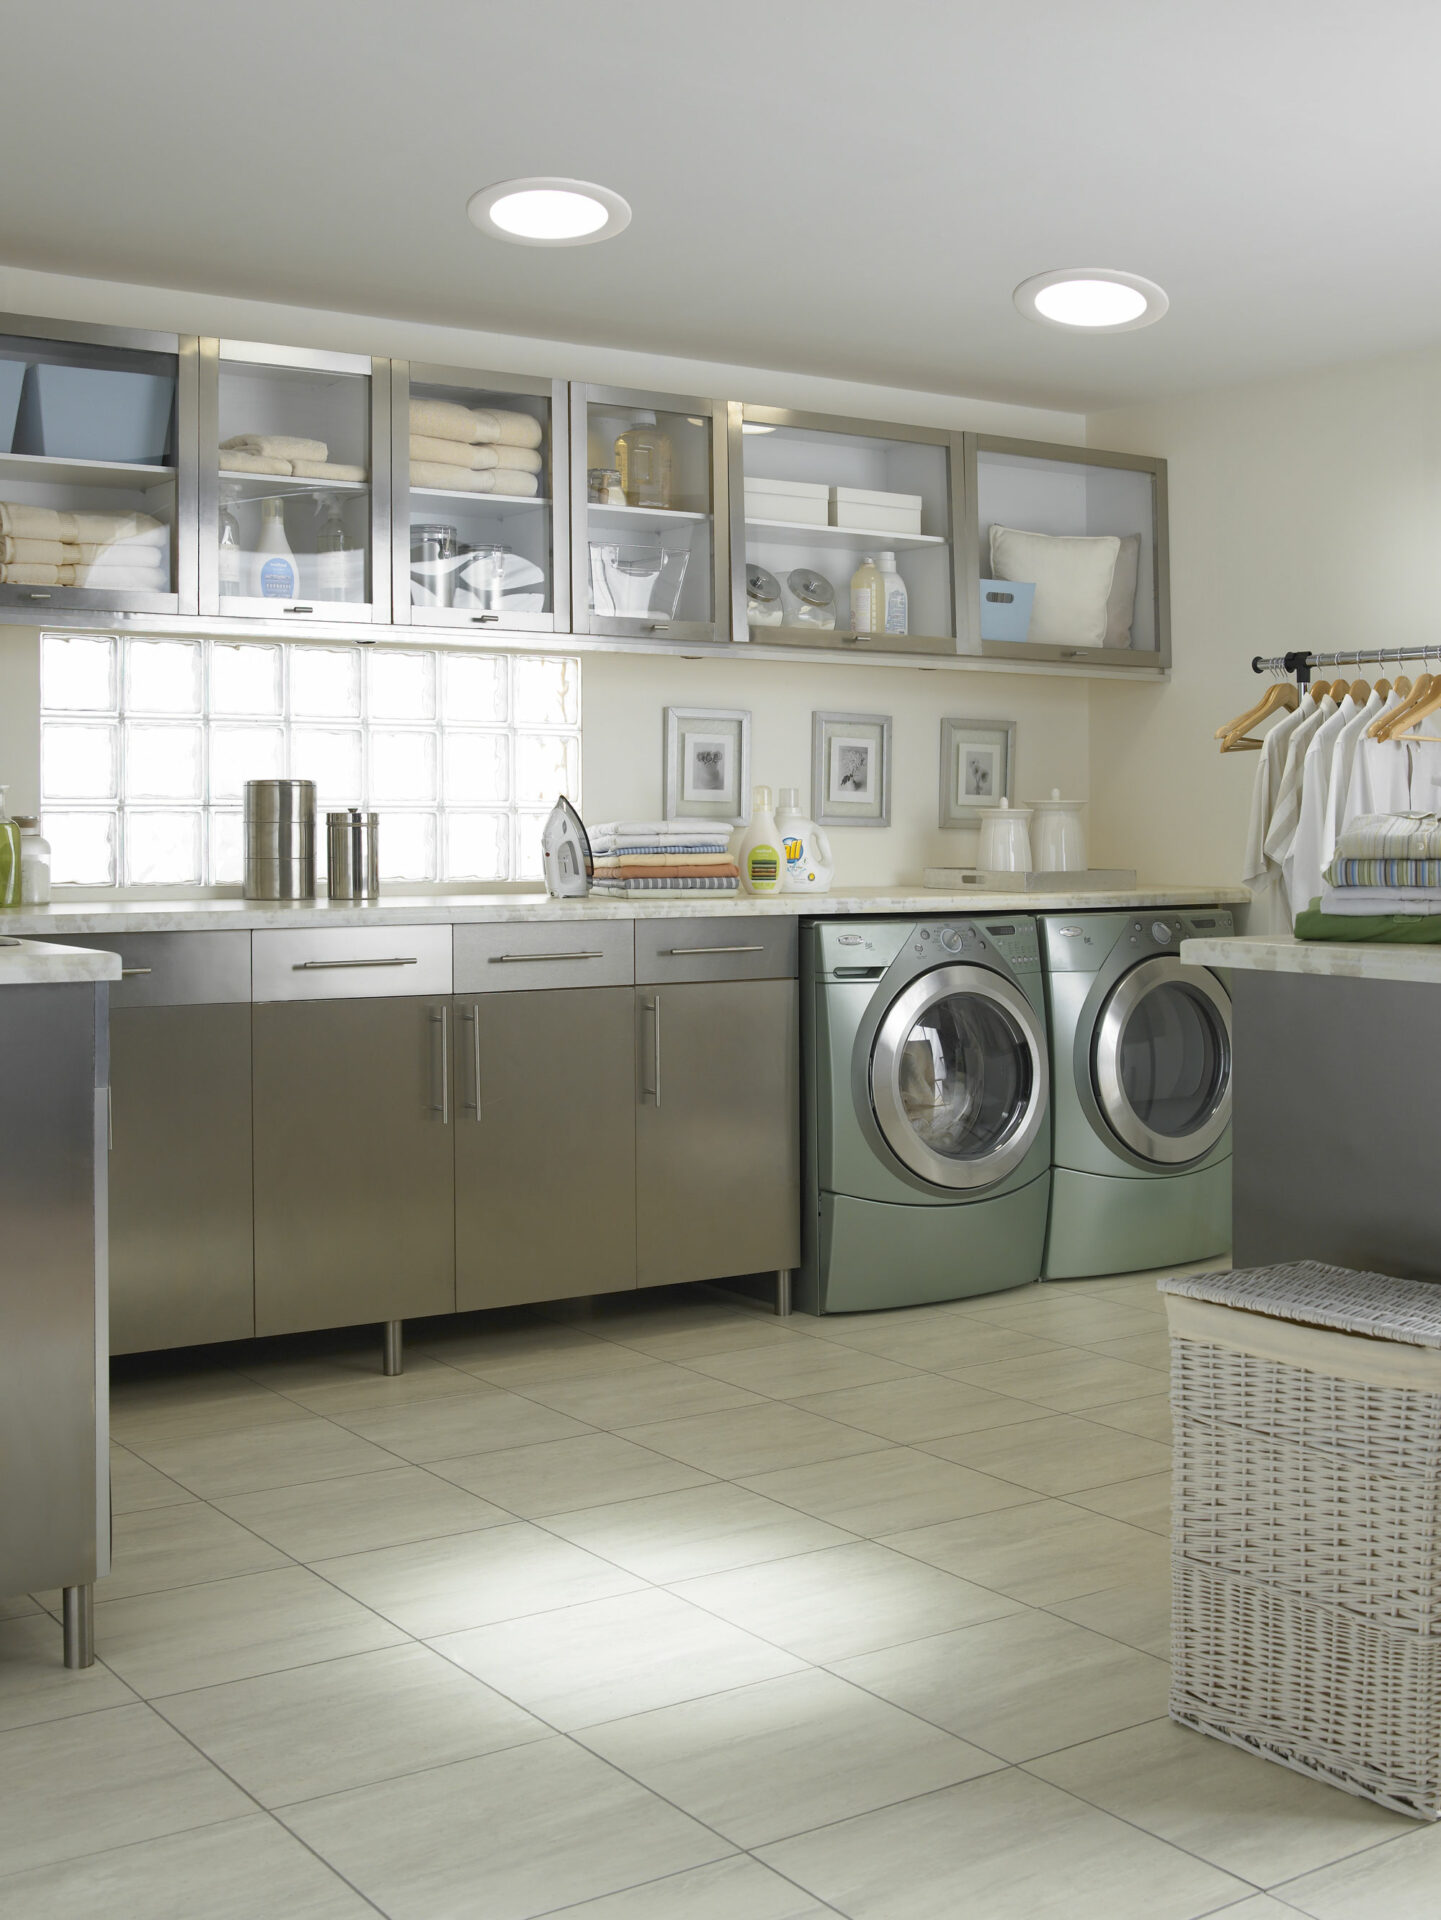 A view of a laundry room